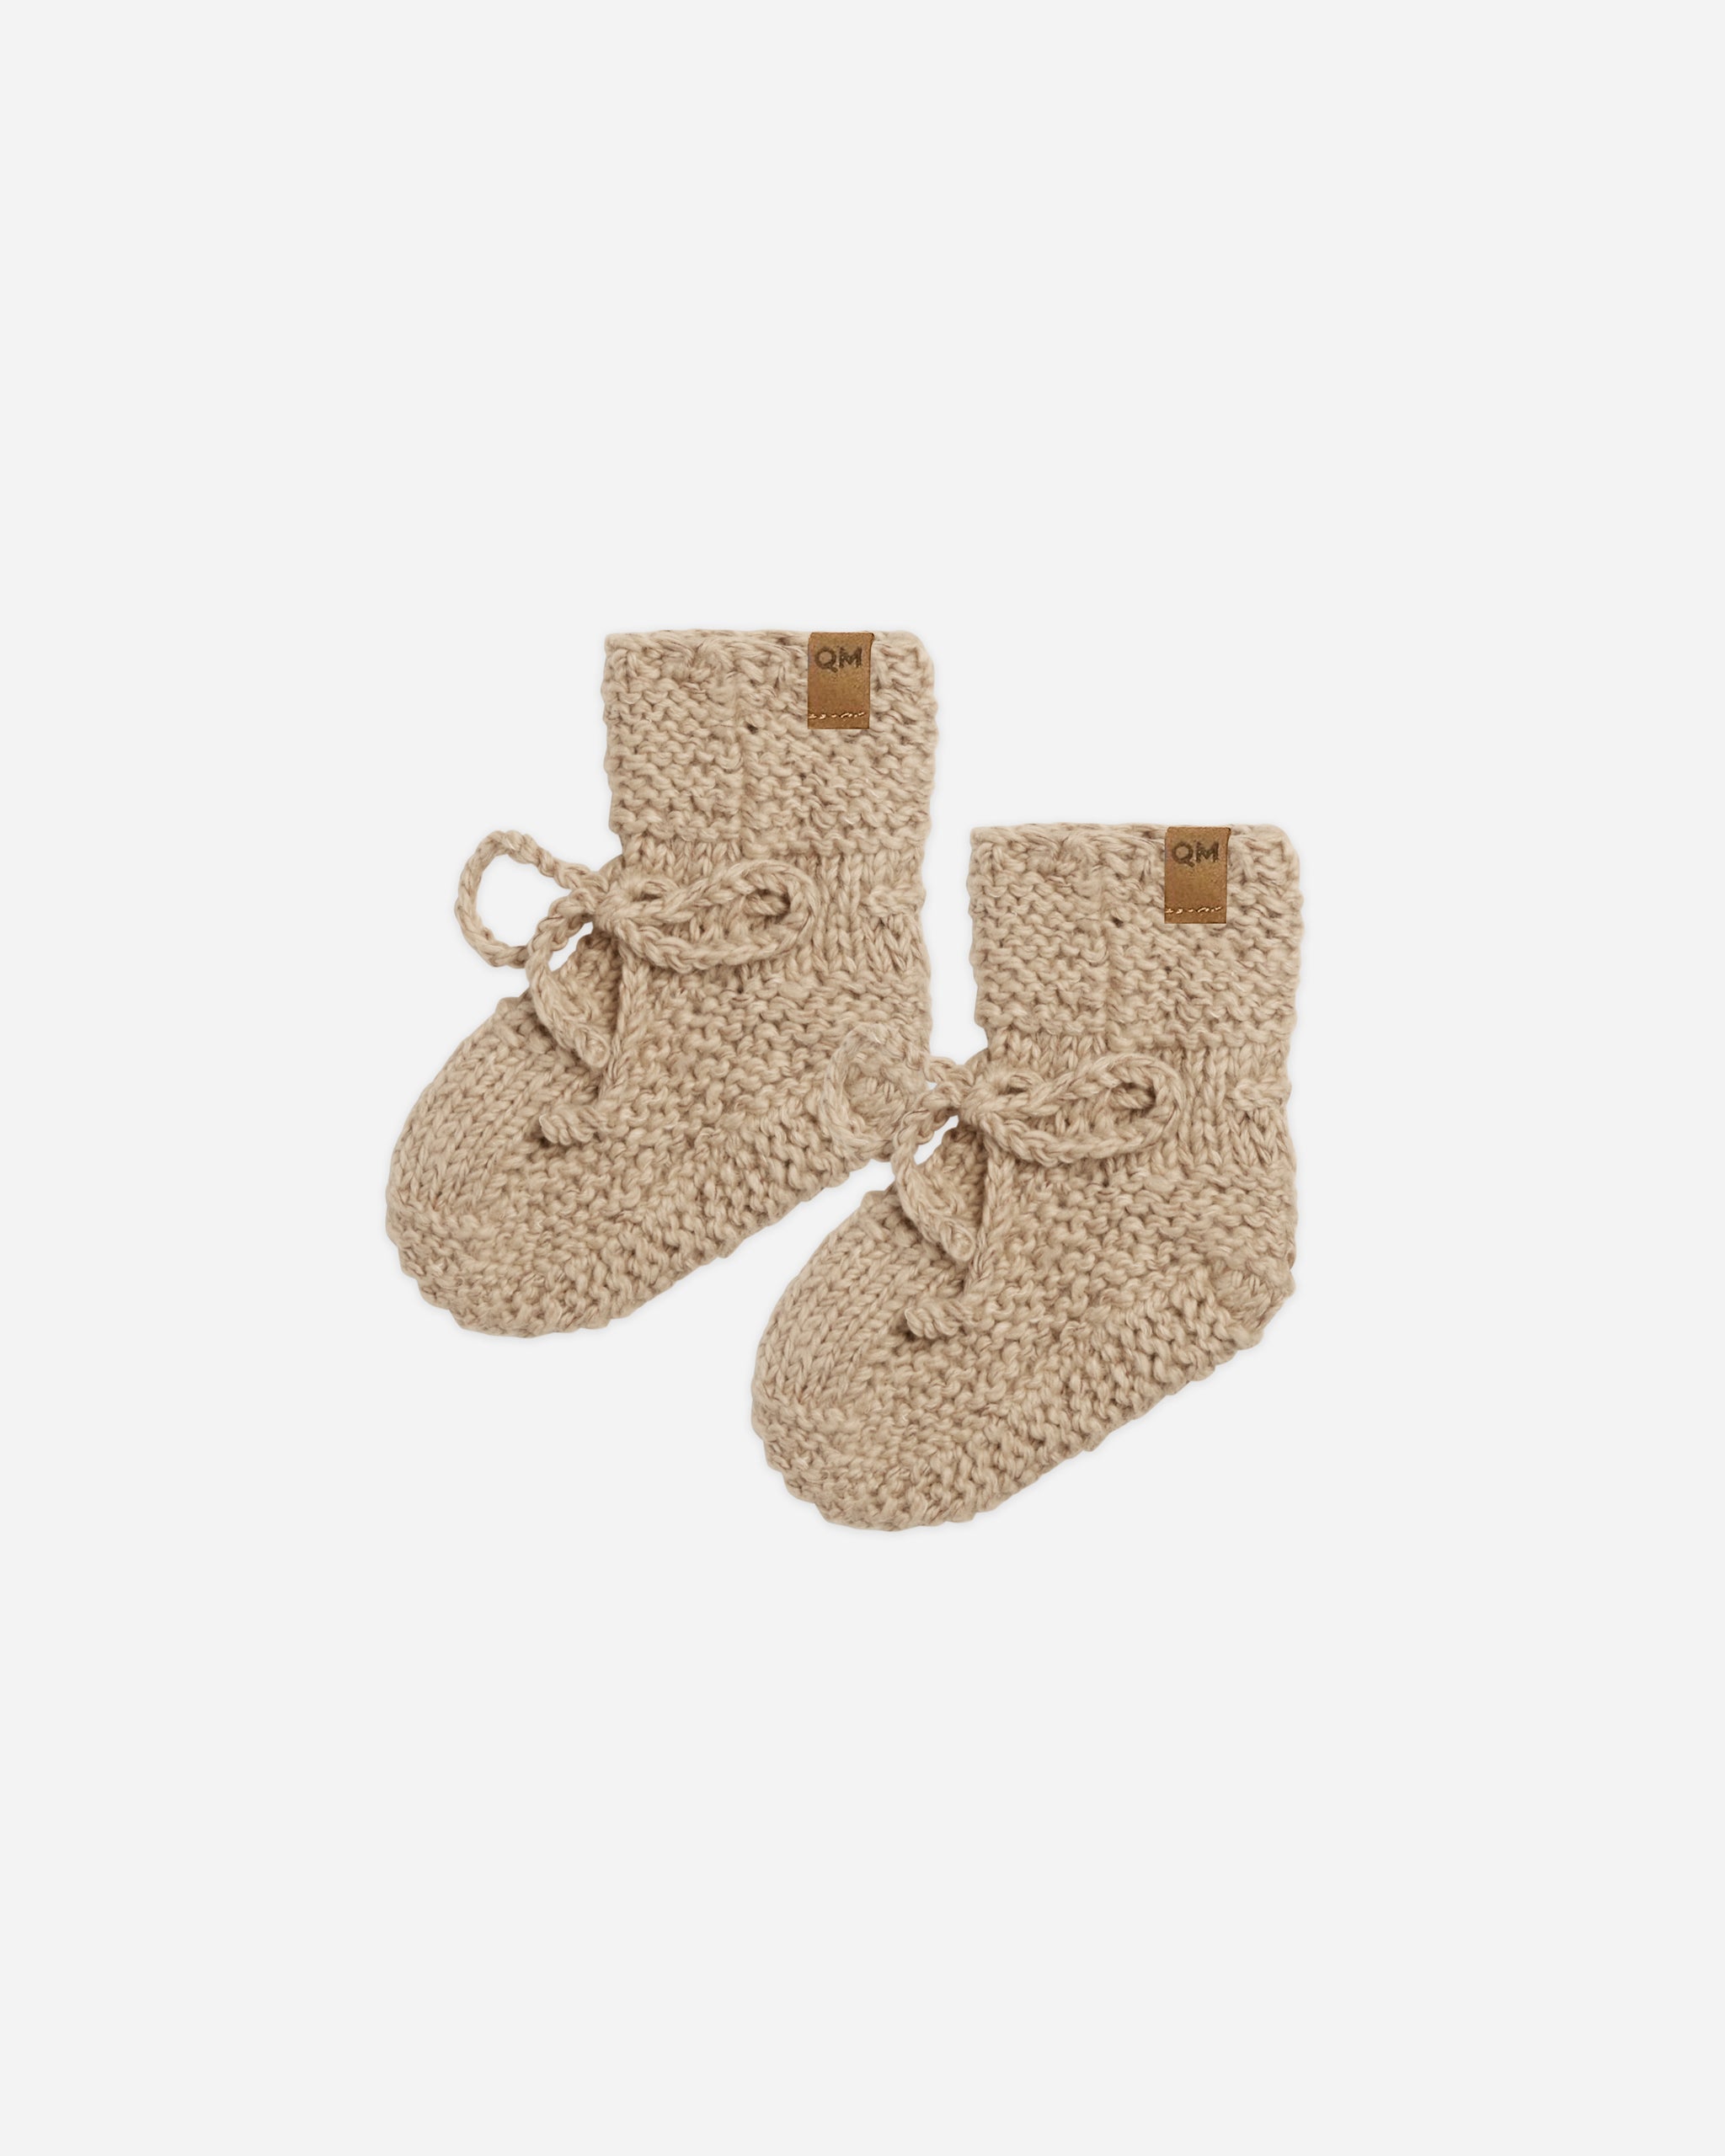 Knit Booties || Latte Speckled - Rylee + Cru | Kids Clothes | Trendy Baby Clothes | Modern Infant Outfits |